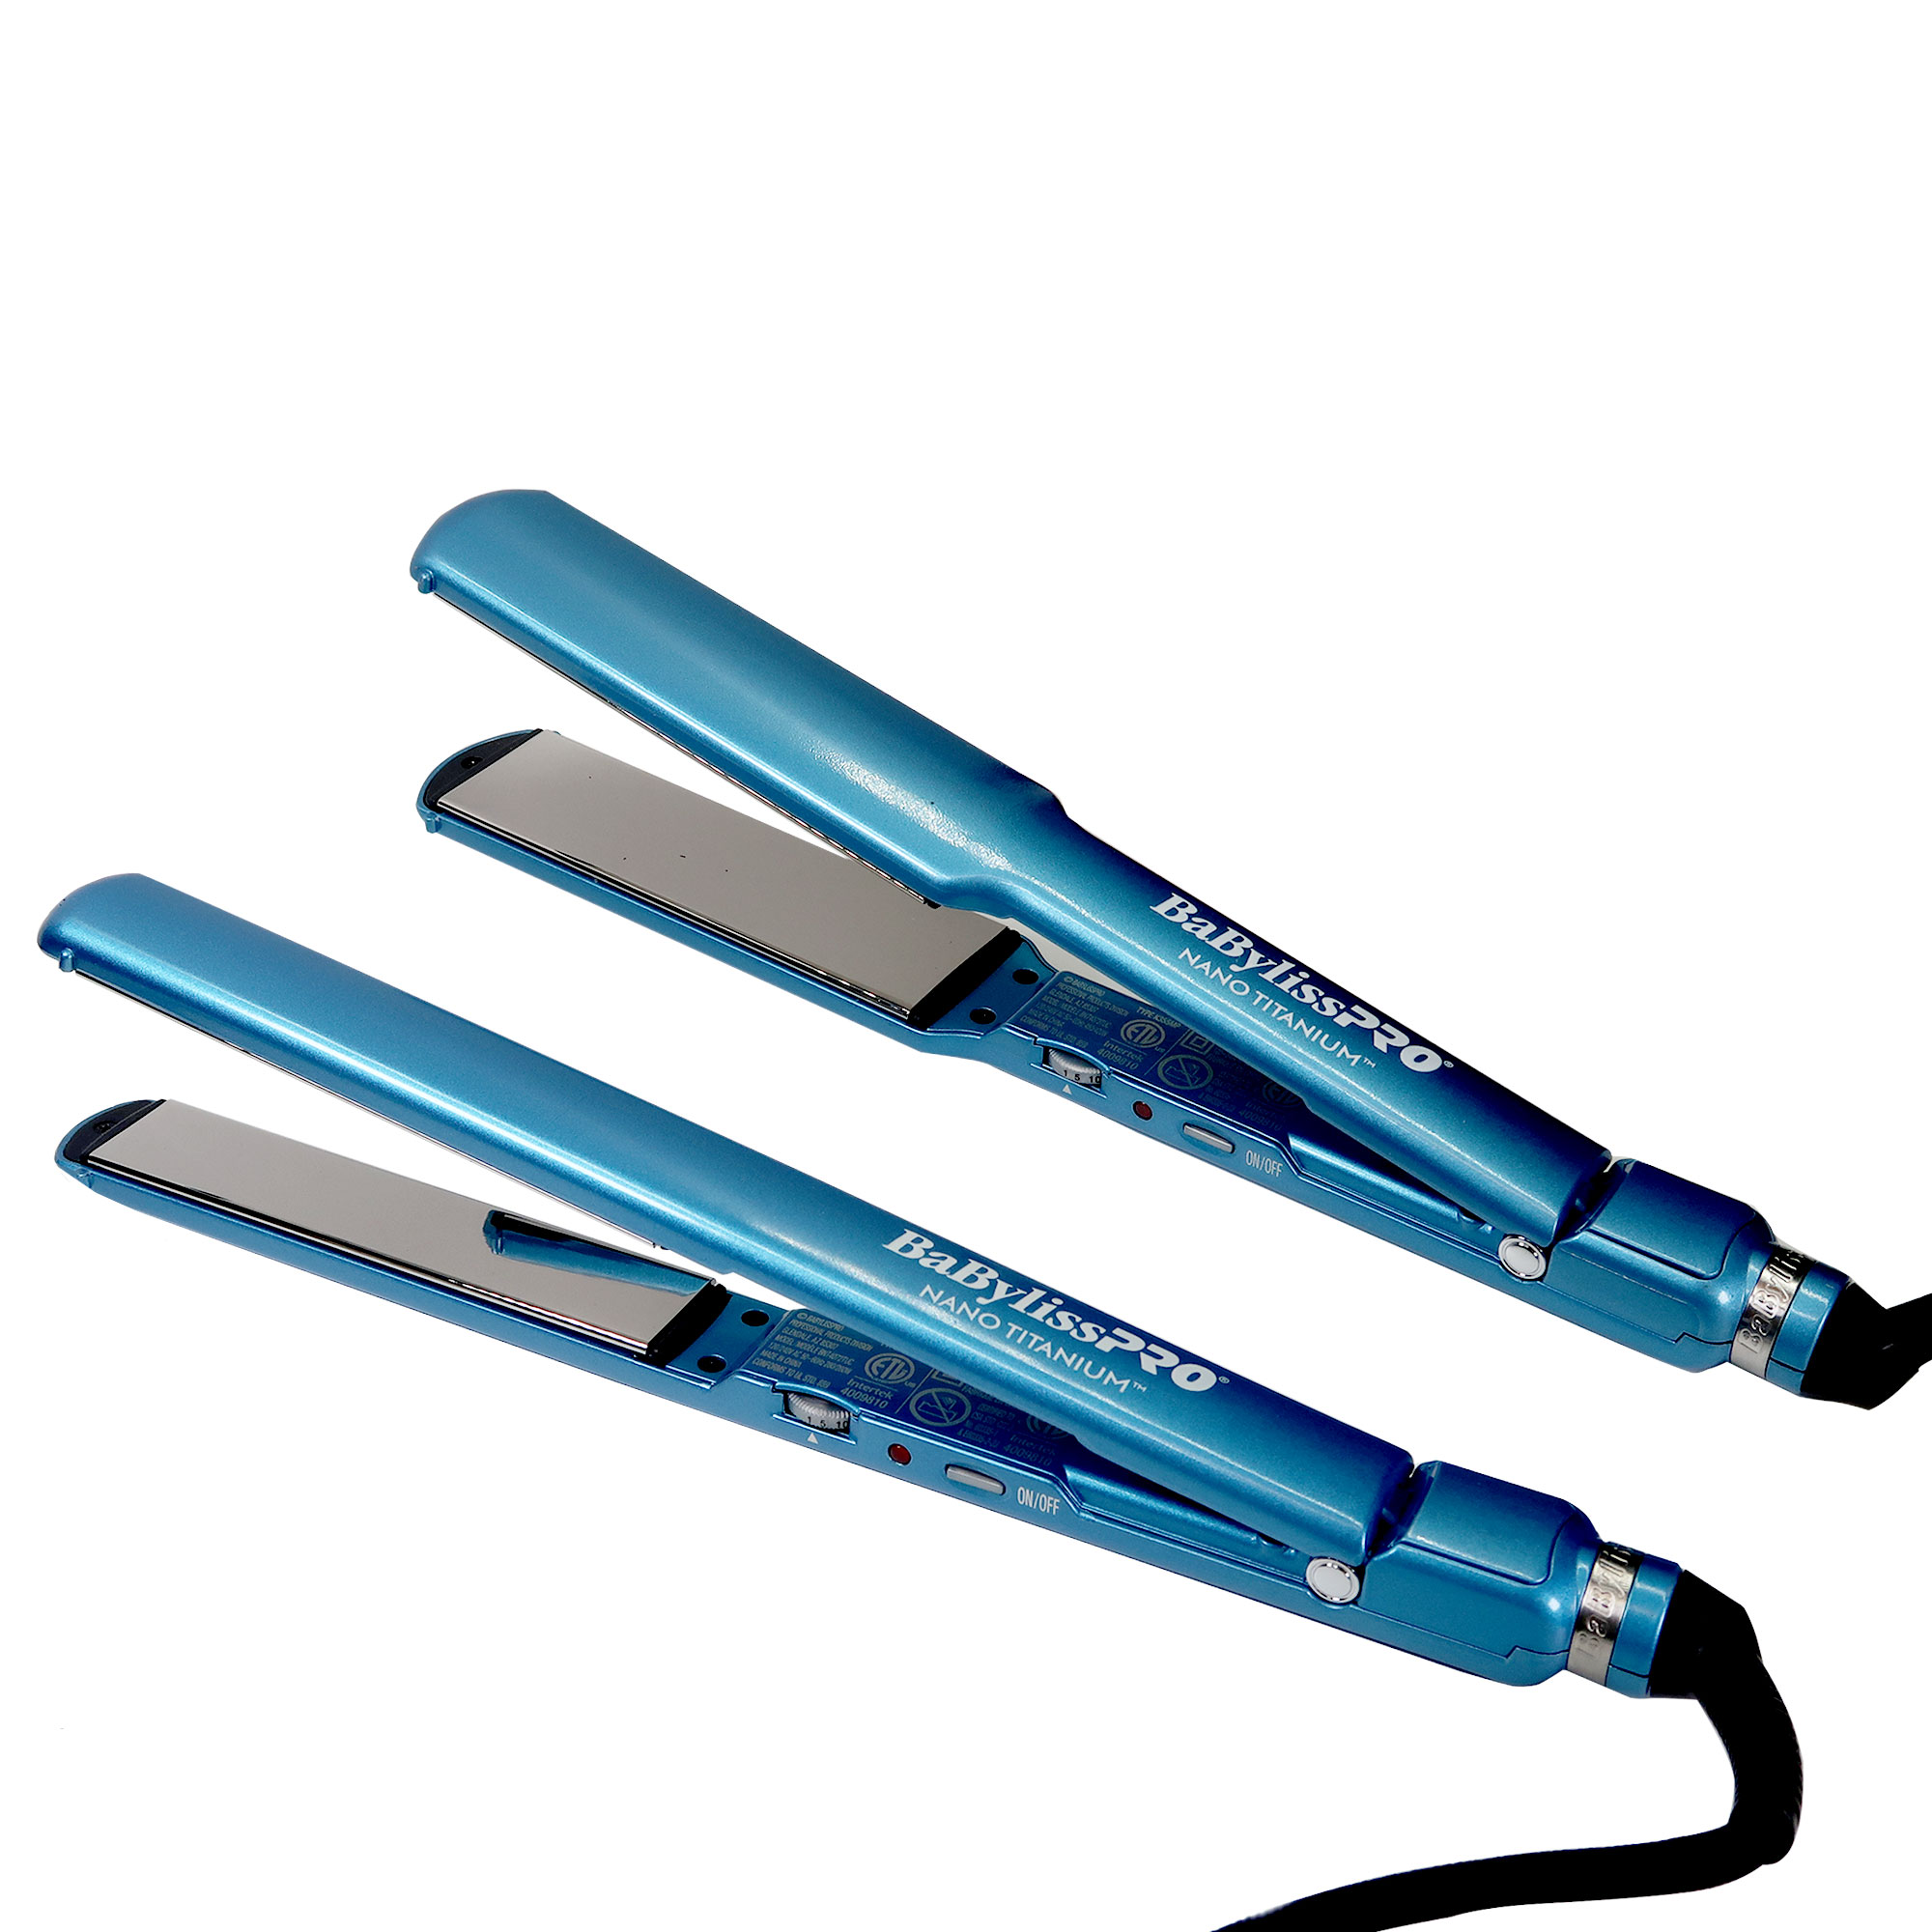 BaByliss Pro Nano Titanium Ultra-Thin Flat Irons 1" & 1 ½" Combo #BNTPP57UC with Babyliss Pro Barberology Industrial Barber Apro